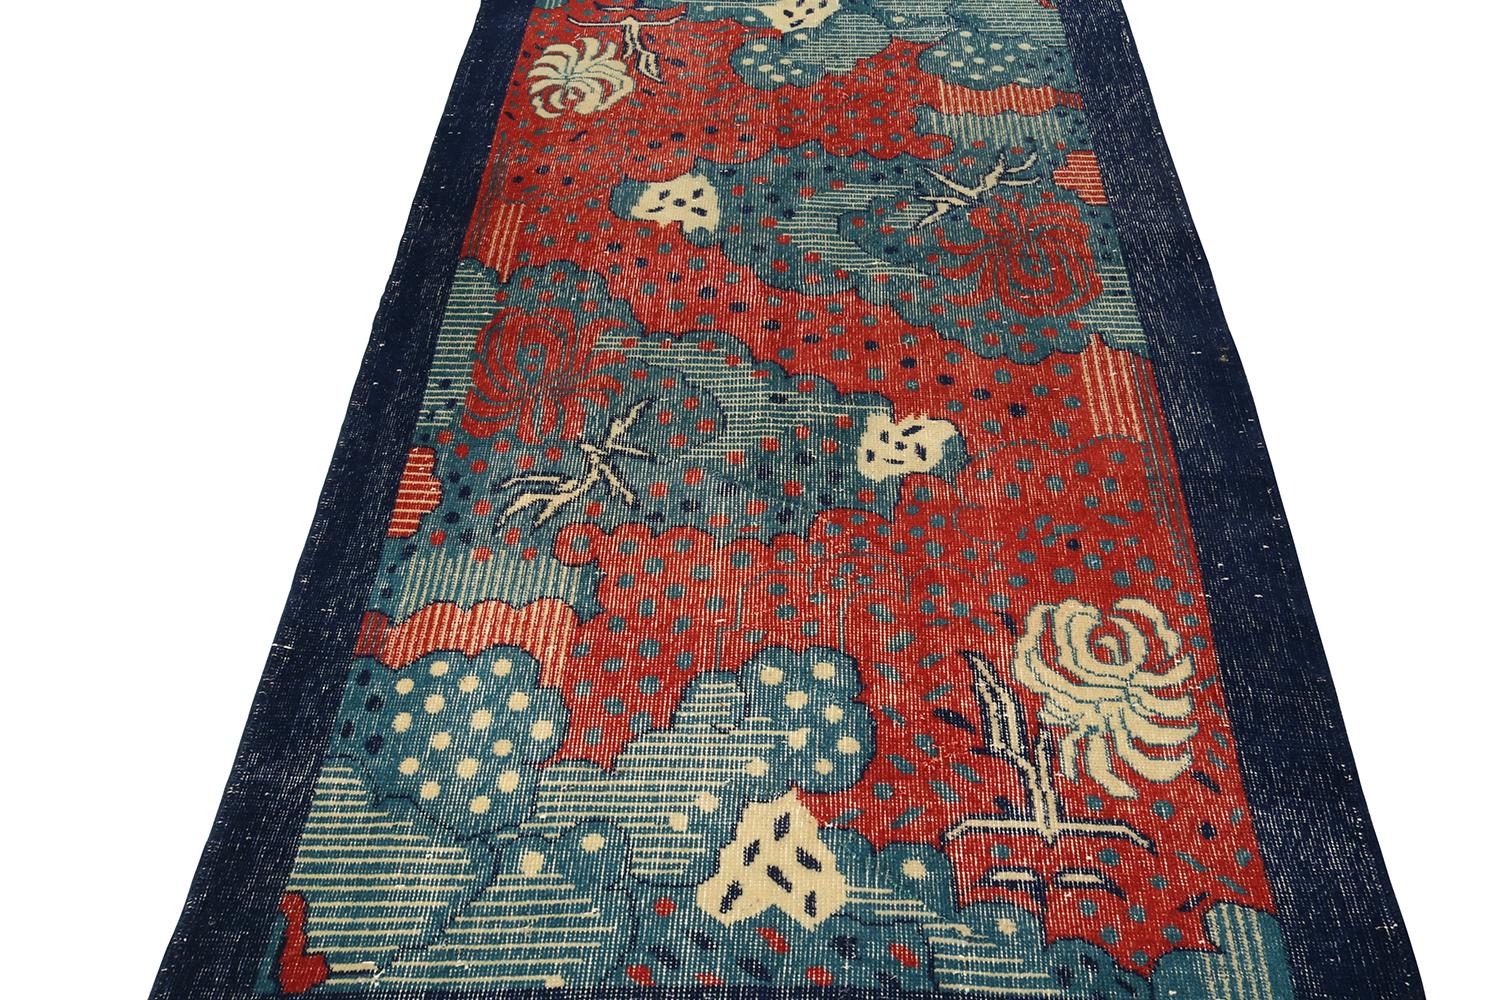 This vintage 4x7 rug is a new addition to Rug & Kilim’s mid-century Pasha Collection. This line is a commemoration, with rare curations we believe to hail from multidisciplinary Turkish designer Zeki Müren.

Further on the Design:

This design